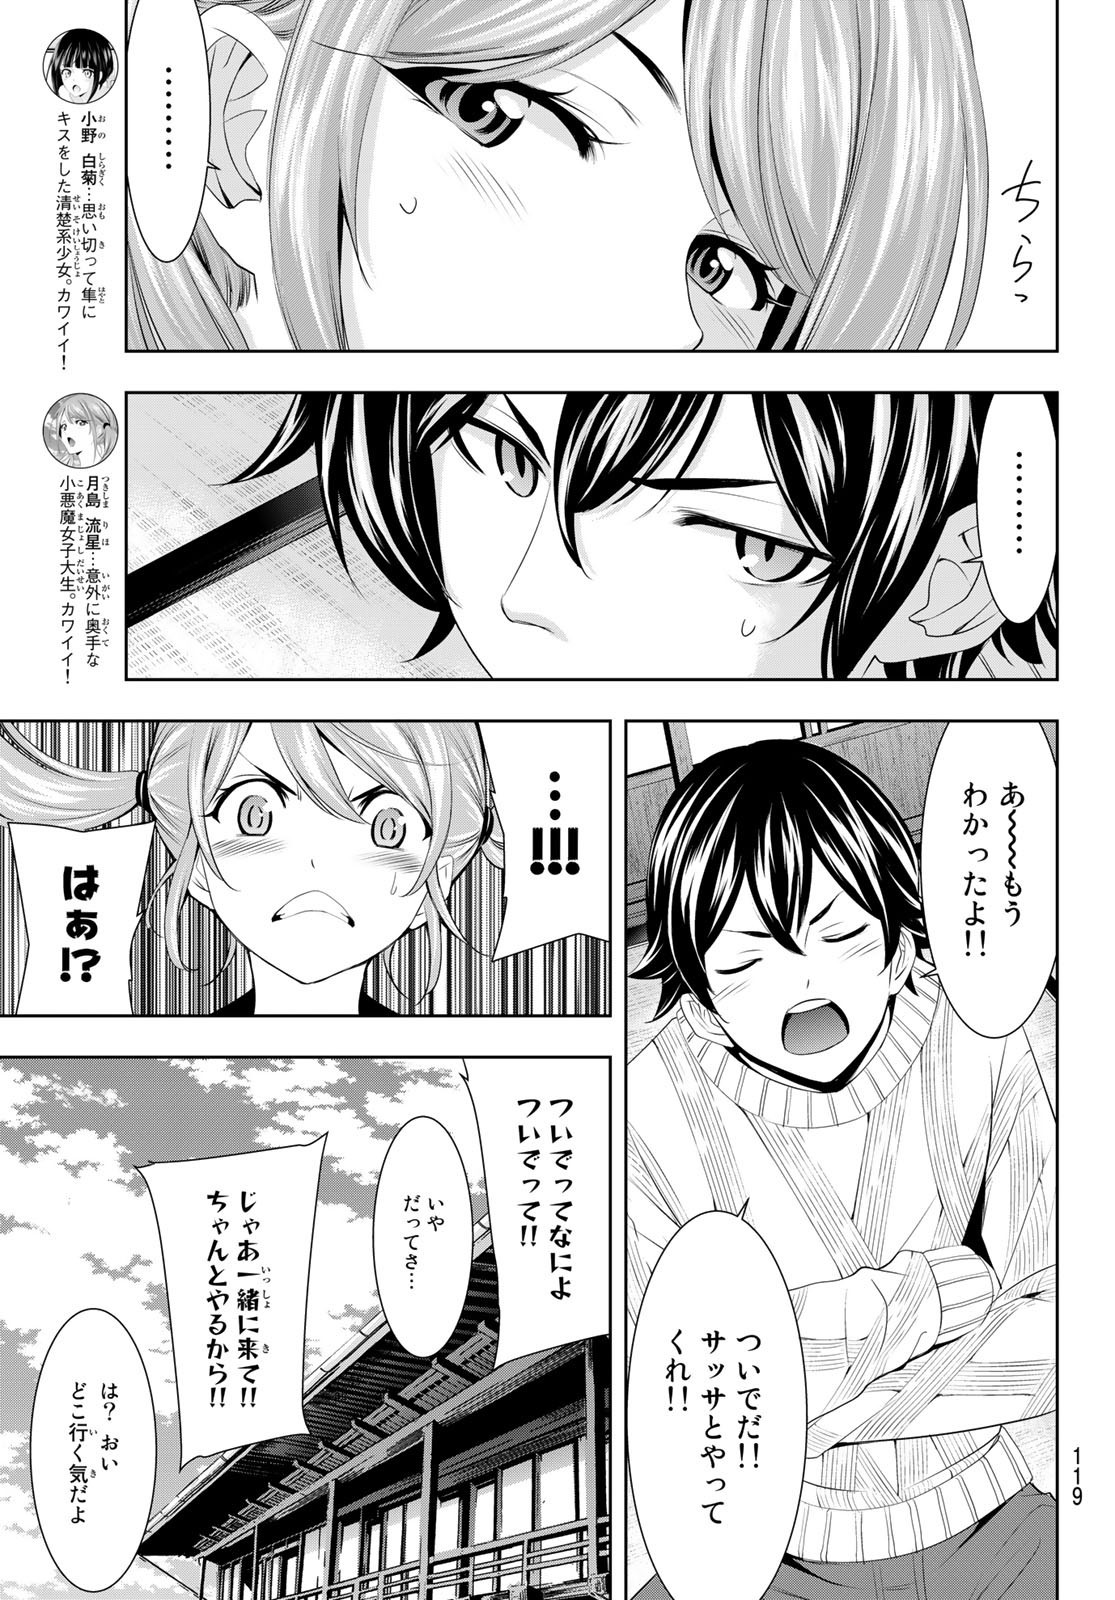 Weekly Shōnen Magazine - 週刊少年マガジン - Chapter 2022-48 - Page 114